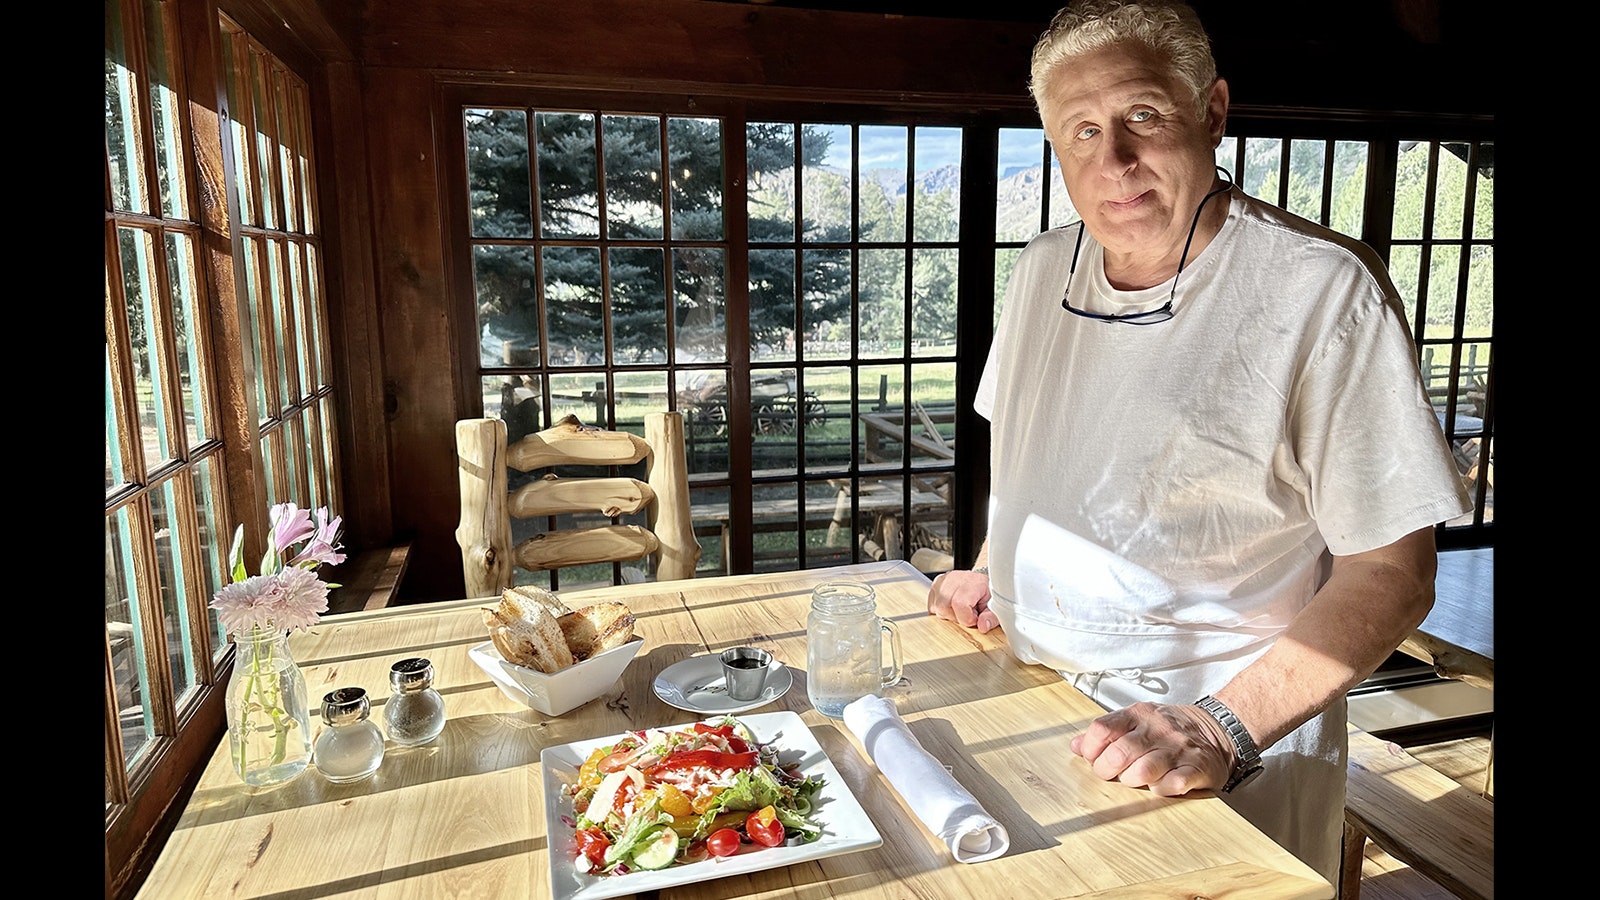 Chef Vince Fiore has brought a new energy and elevated food to Wyoming's historic UXU Ranch.